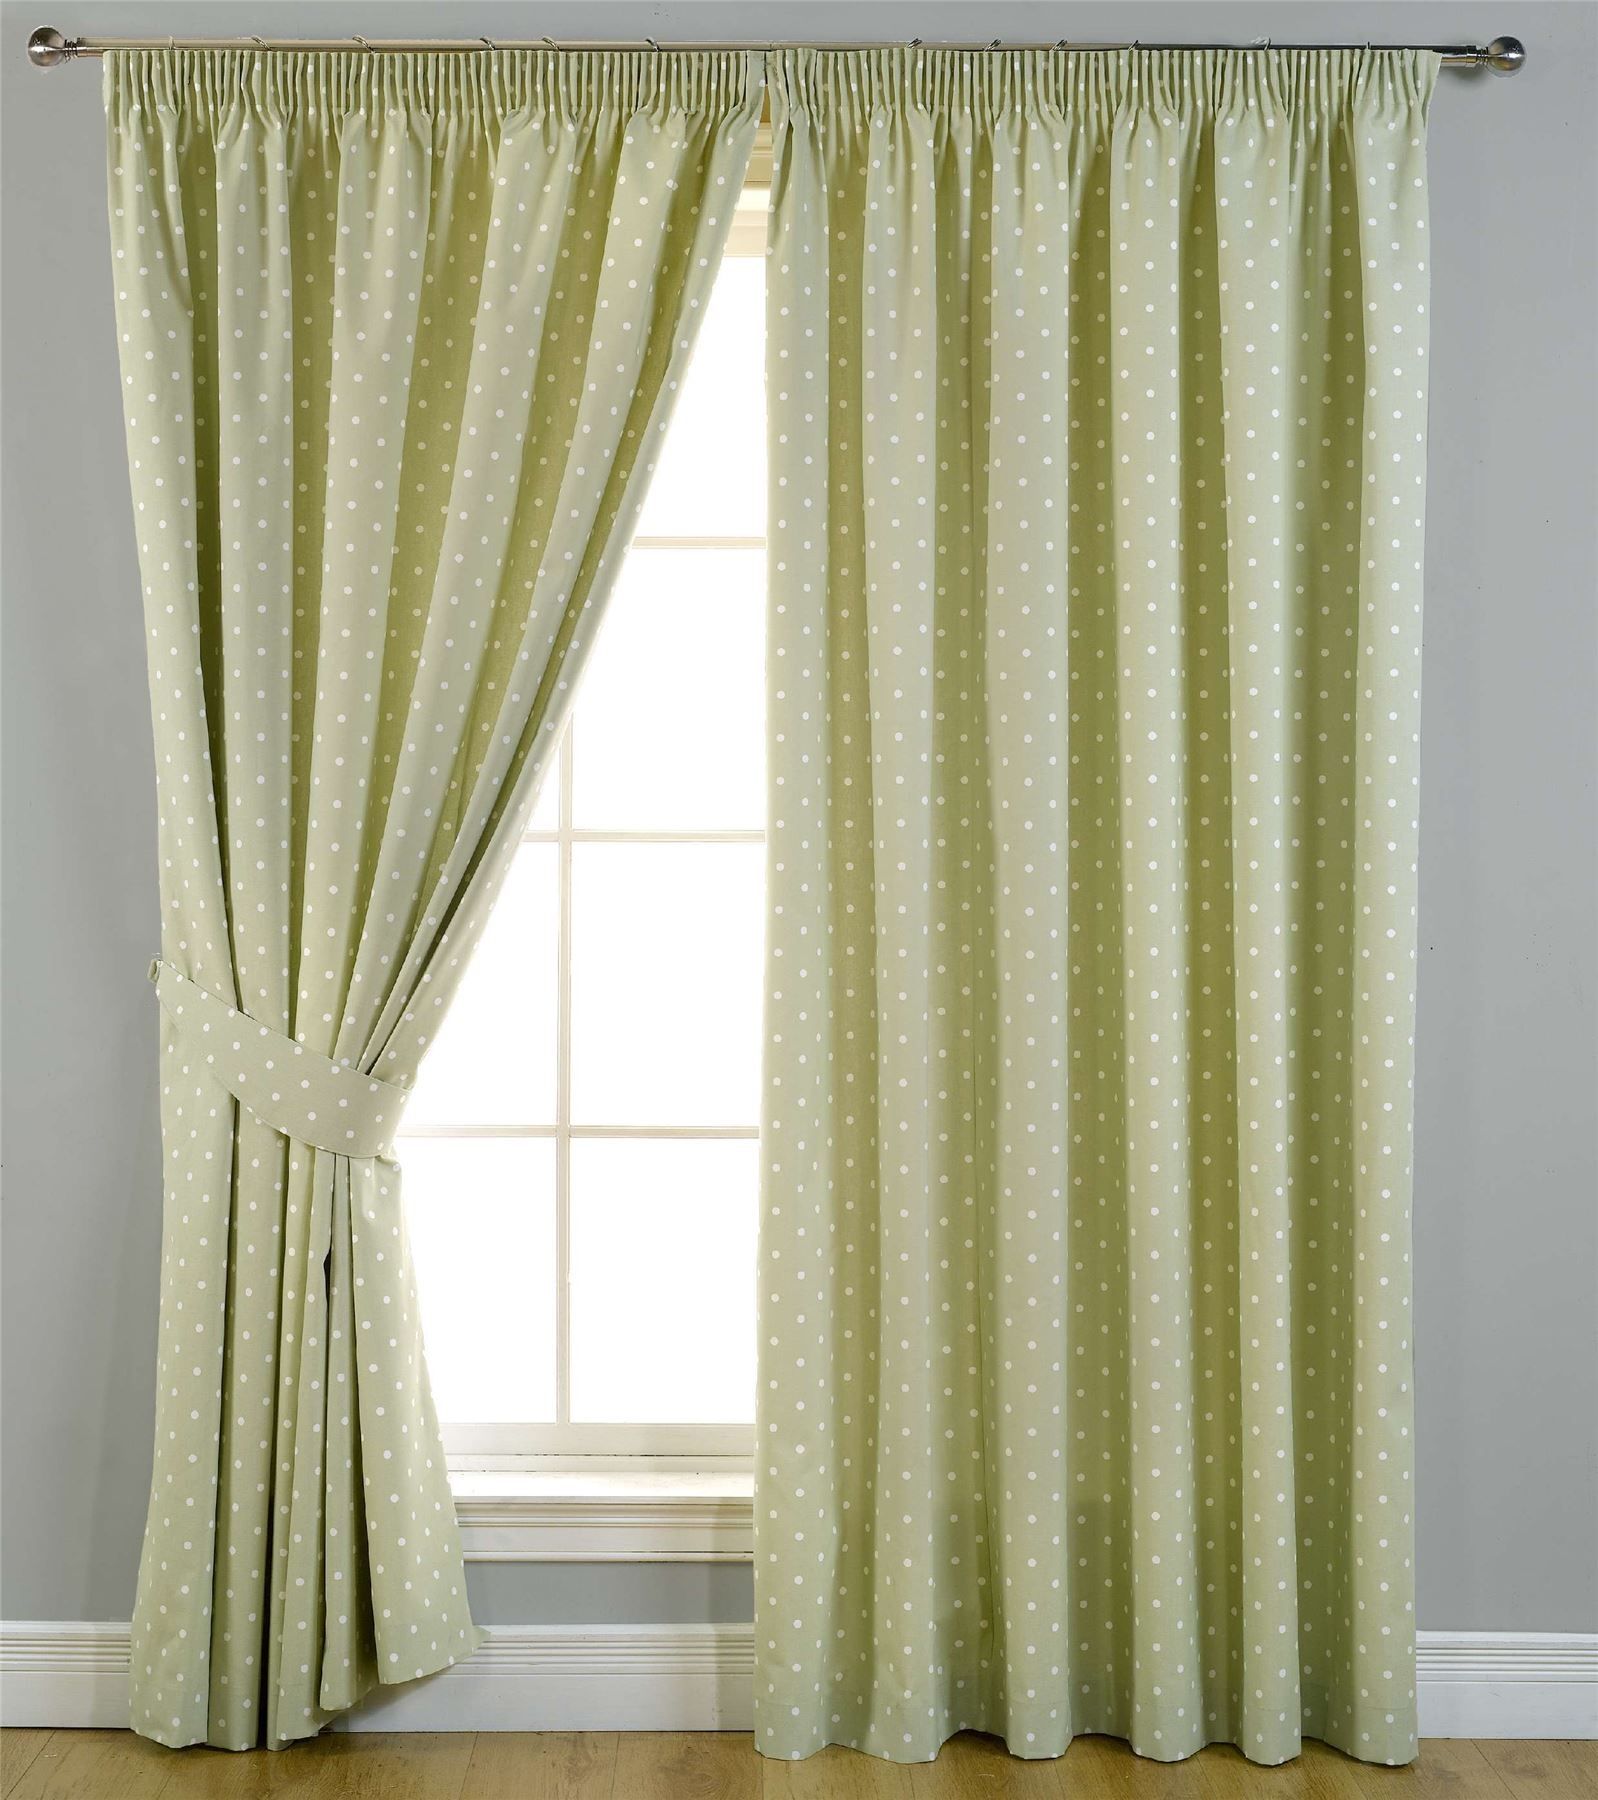 Dolly Blackout Curtains Polka Dots Pastel Spots Ready Made Pair Intended For Pencil Pleat Blackout Curtains (View 7 of 15)